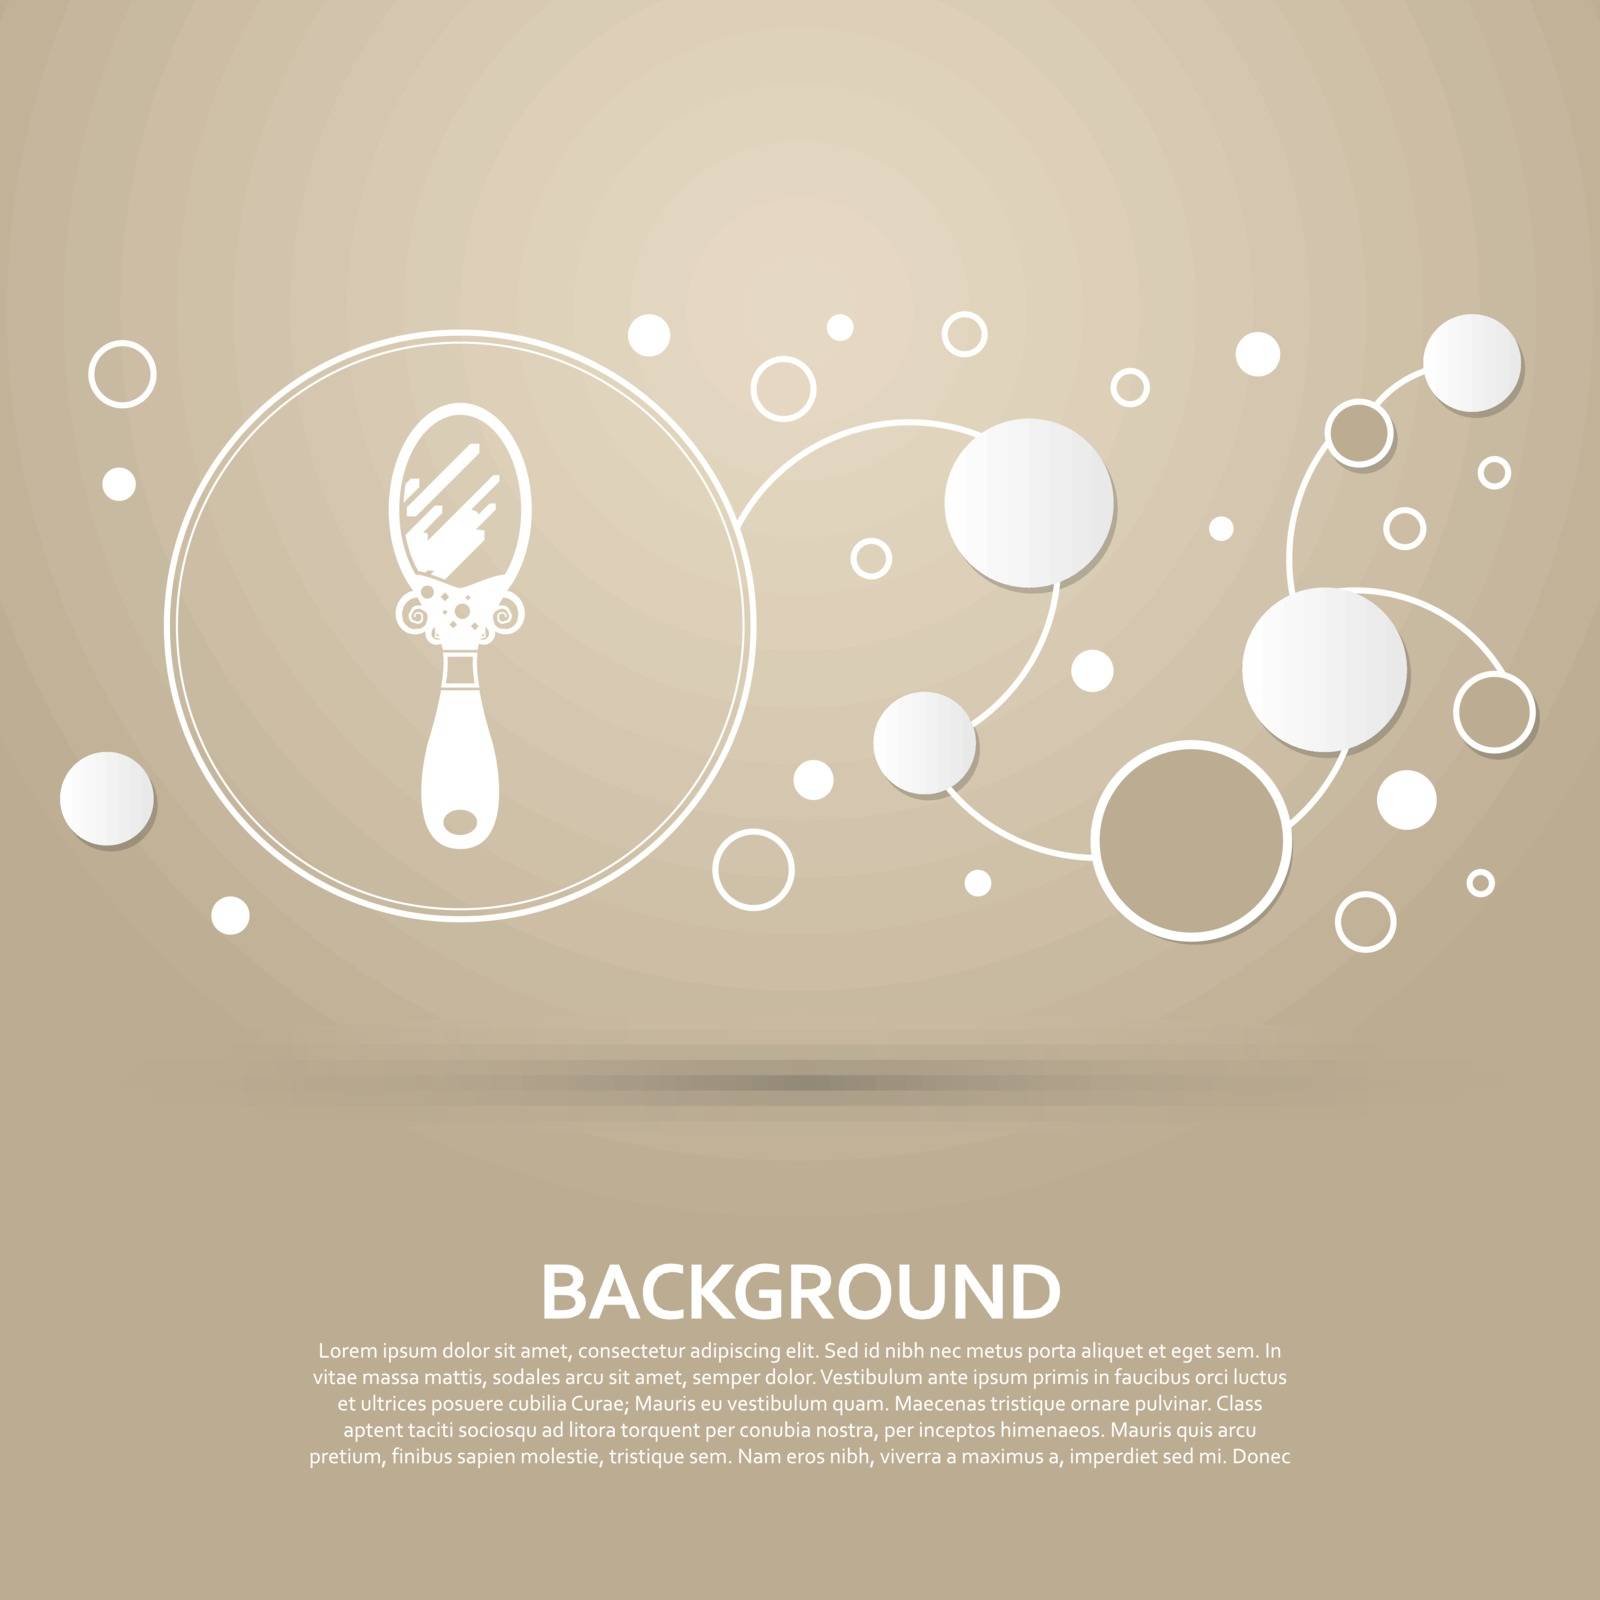 mirror icon on a brown background with elegant style and modern design infographic. Vector illustration